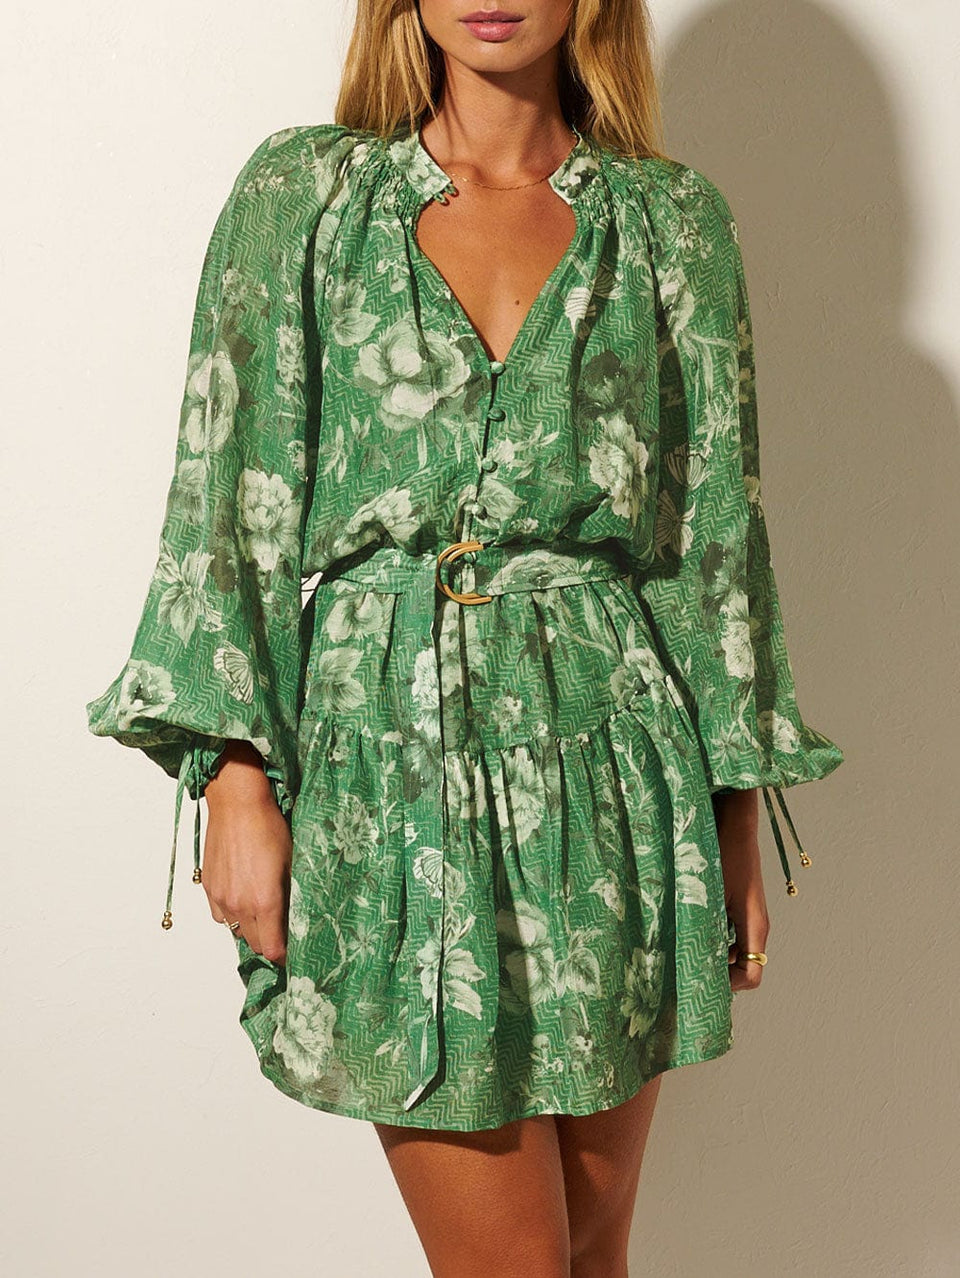 Studio model wears KIVARI Khalo Mini Dress: A green floral dress featuring a button-through bodice, full-length blouson sleeves and a tiered skirt with belt. 